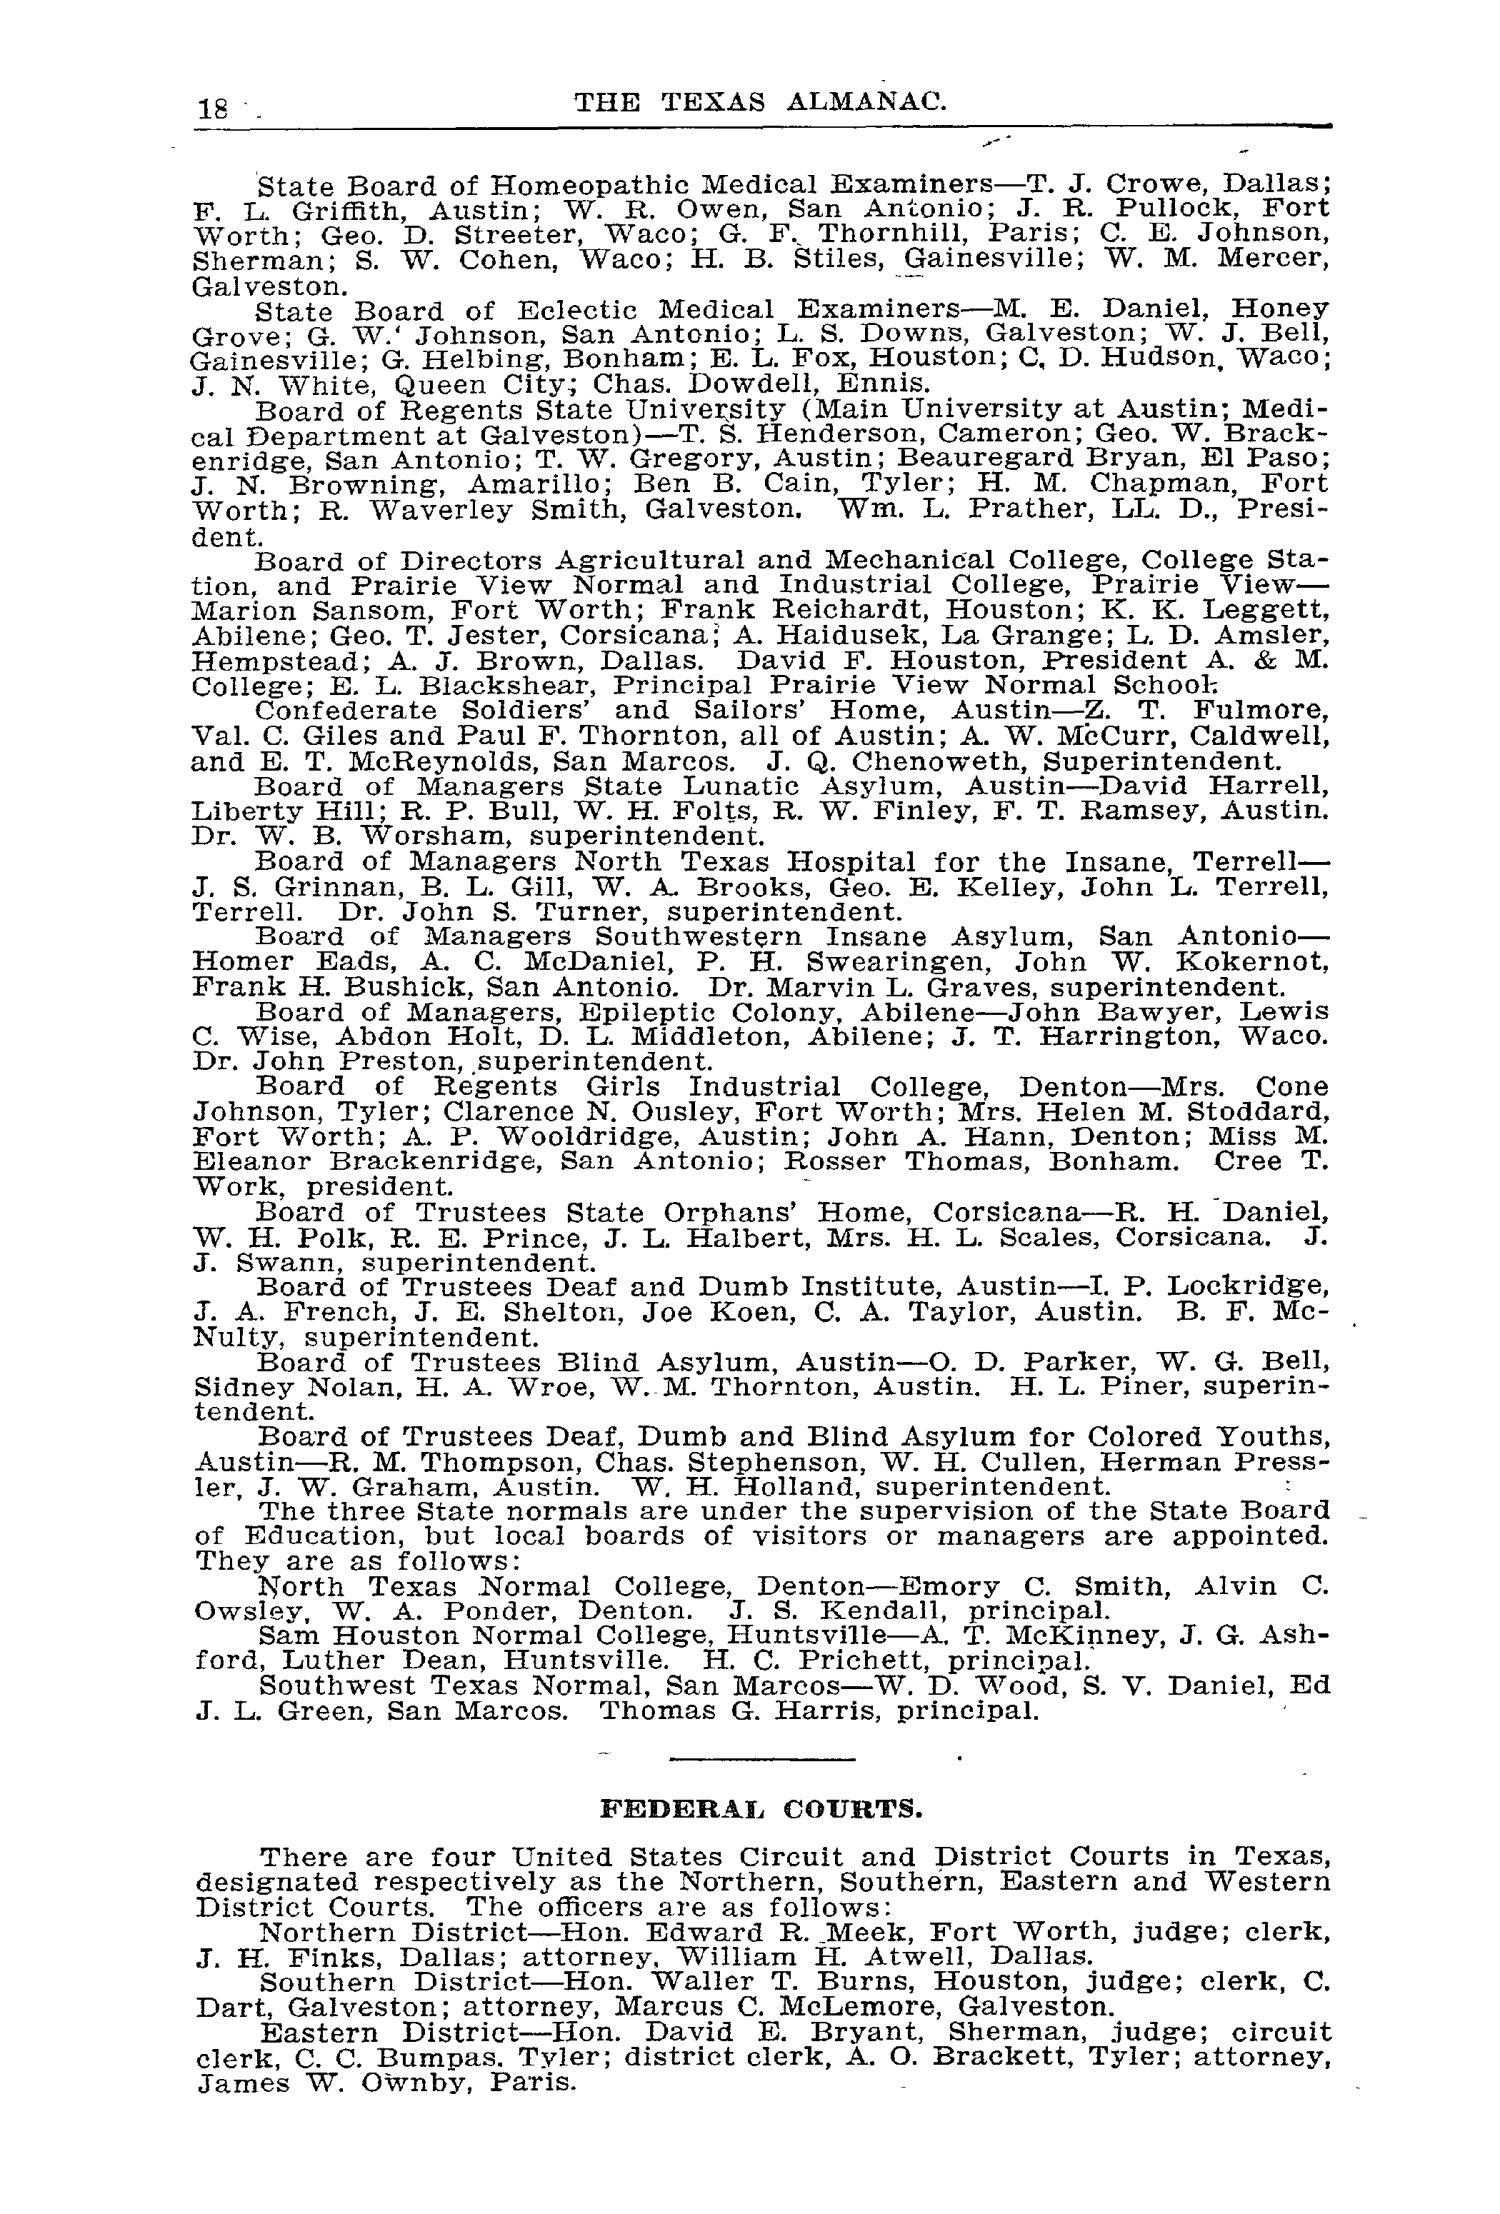 Texas Almanac and State Industrial Guide for 1904
                                                
                                                    18
                                                